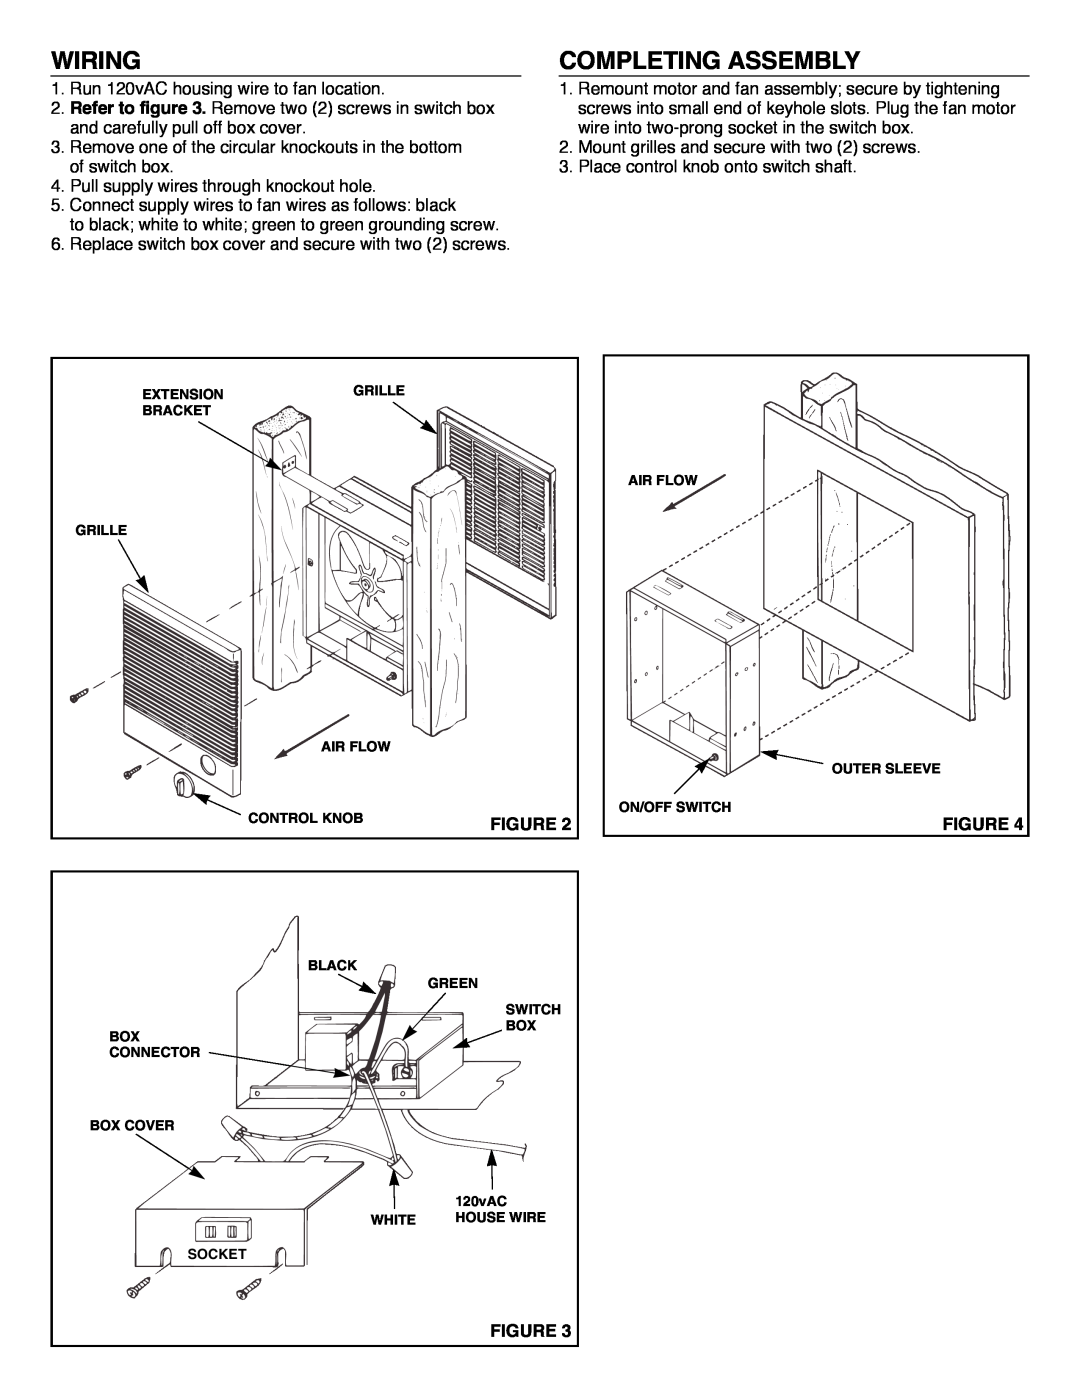 NuTone 8145 installation instructions Wiring, Completing Assembly, Figure 